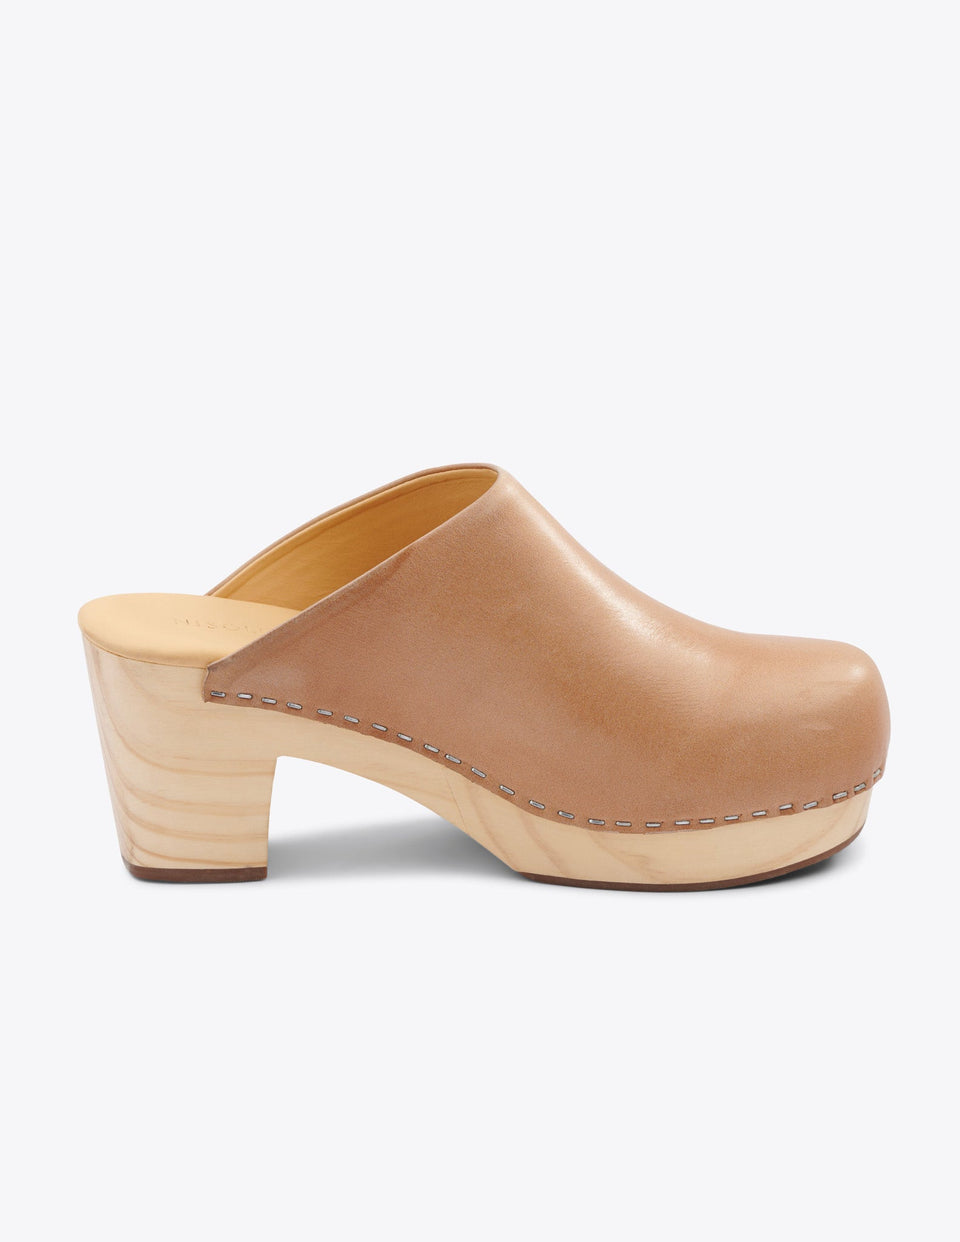 All-Day Heeled Clog - Almond